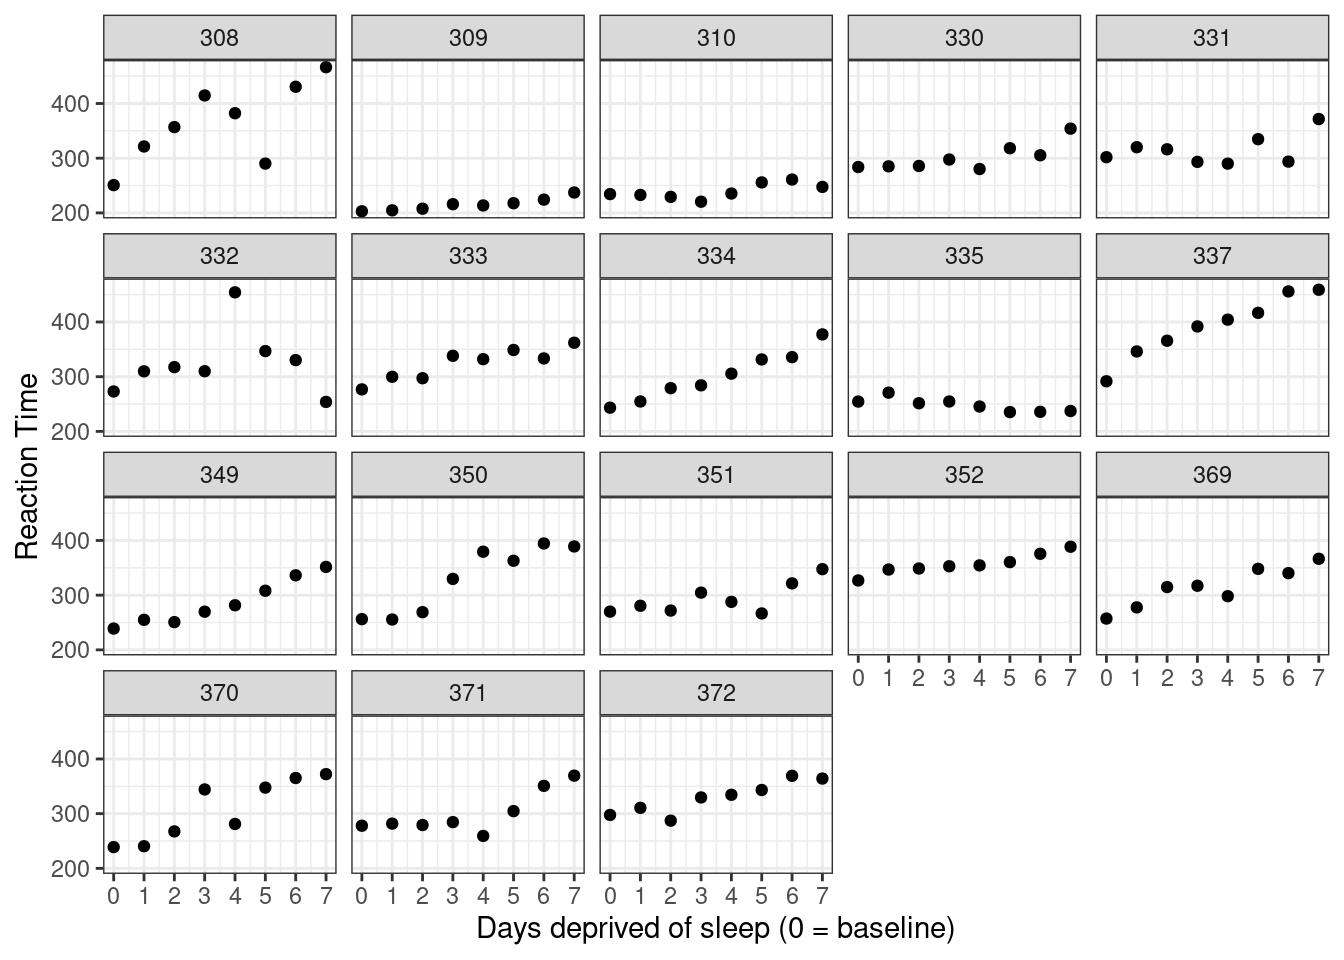 *Data from Belenky et al. (2003), showing reaction time at baseline (0) and after each day of sleep deprivation.*